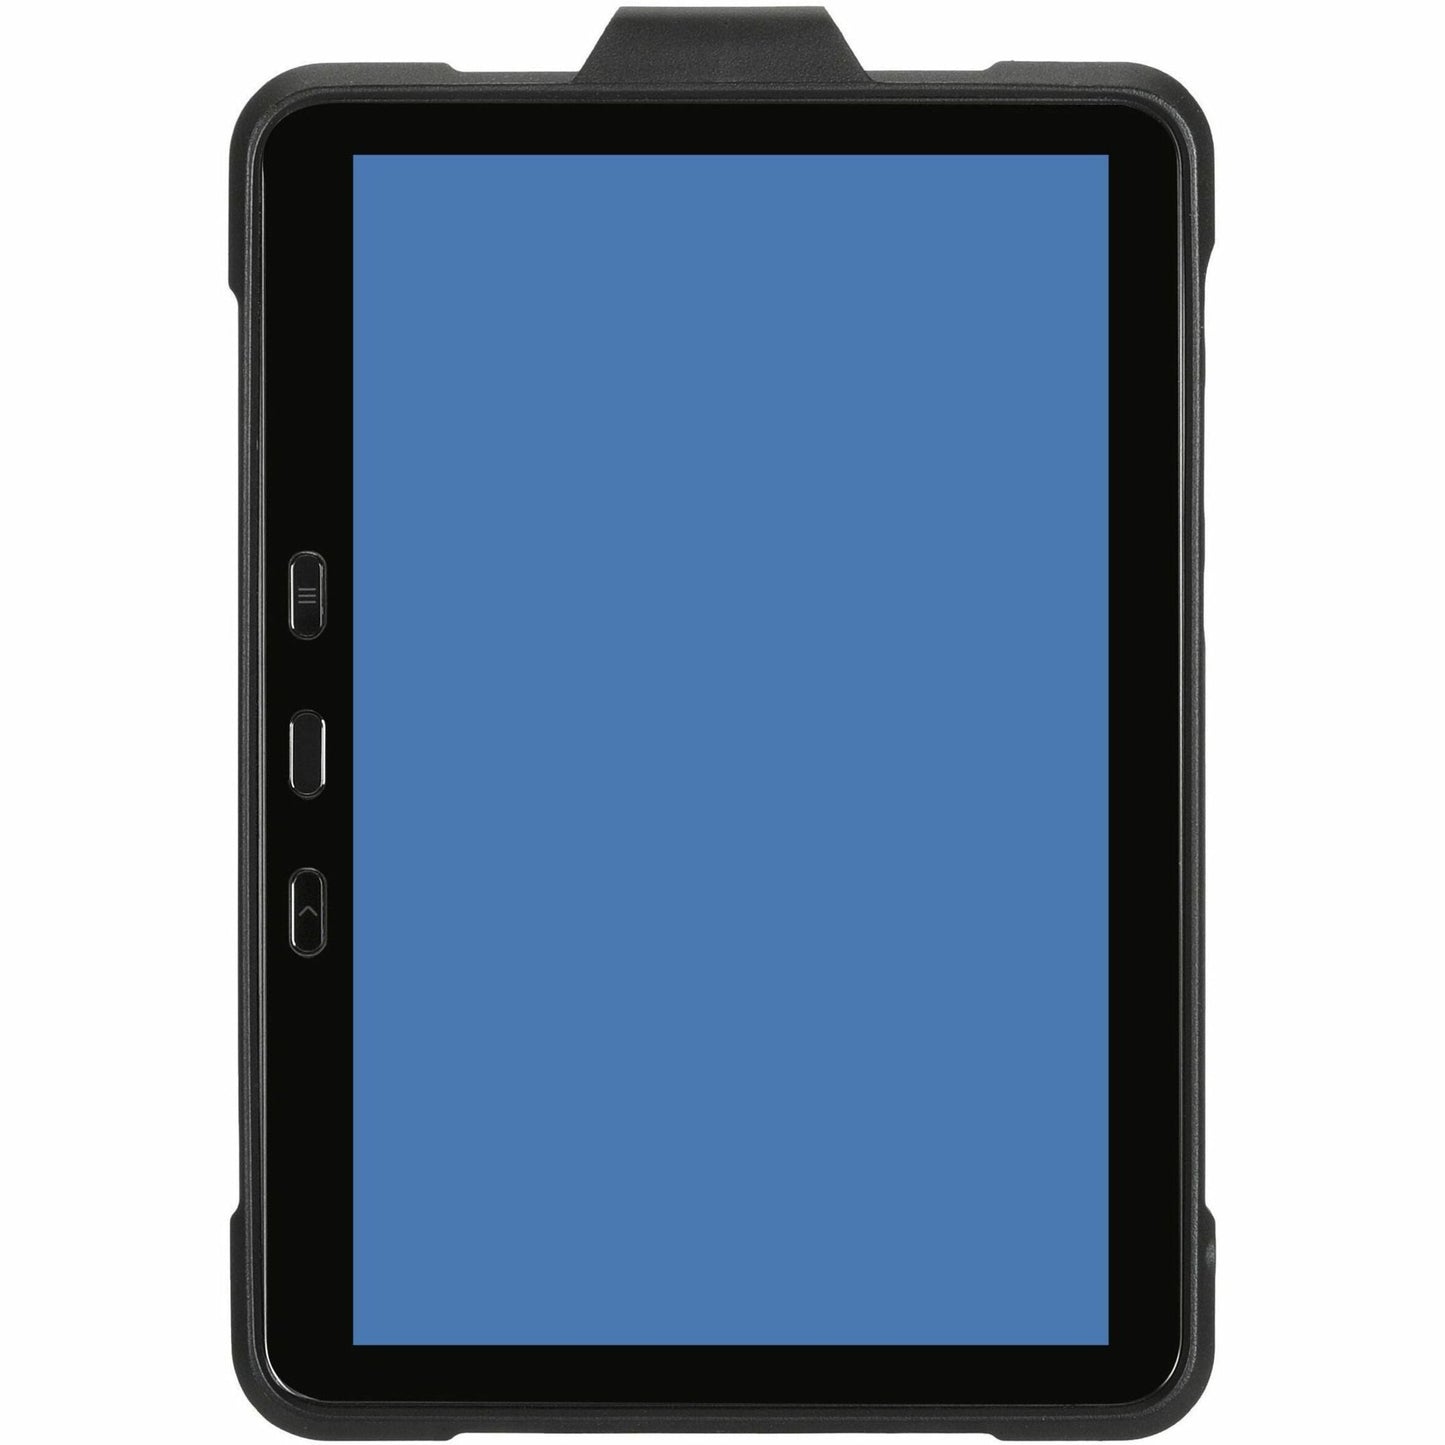 Targus Field-Ready THD501GLZ Rugged Carrying Case Samsung Galaxy Tab Active Pro Tablet - Black